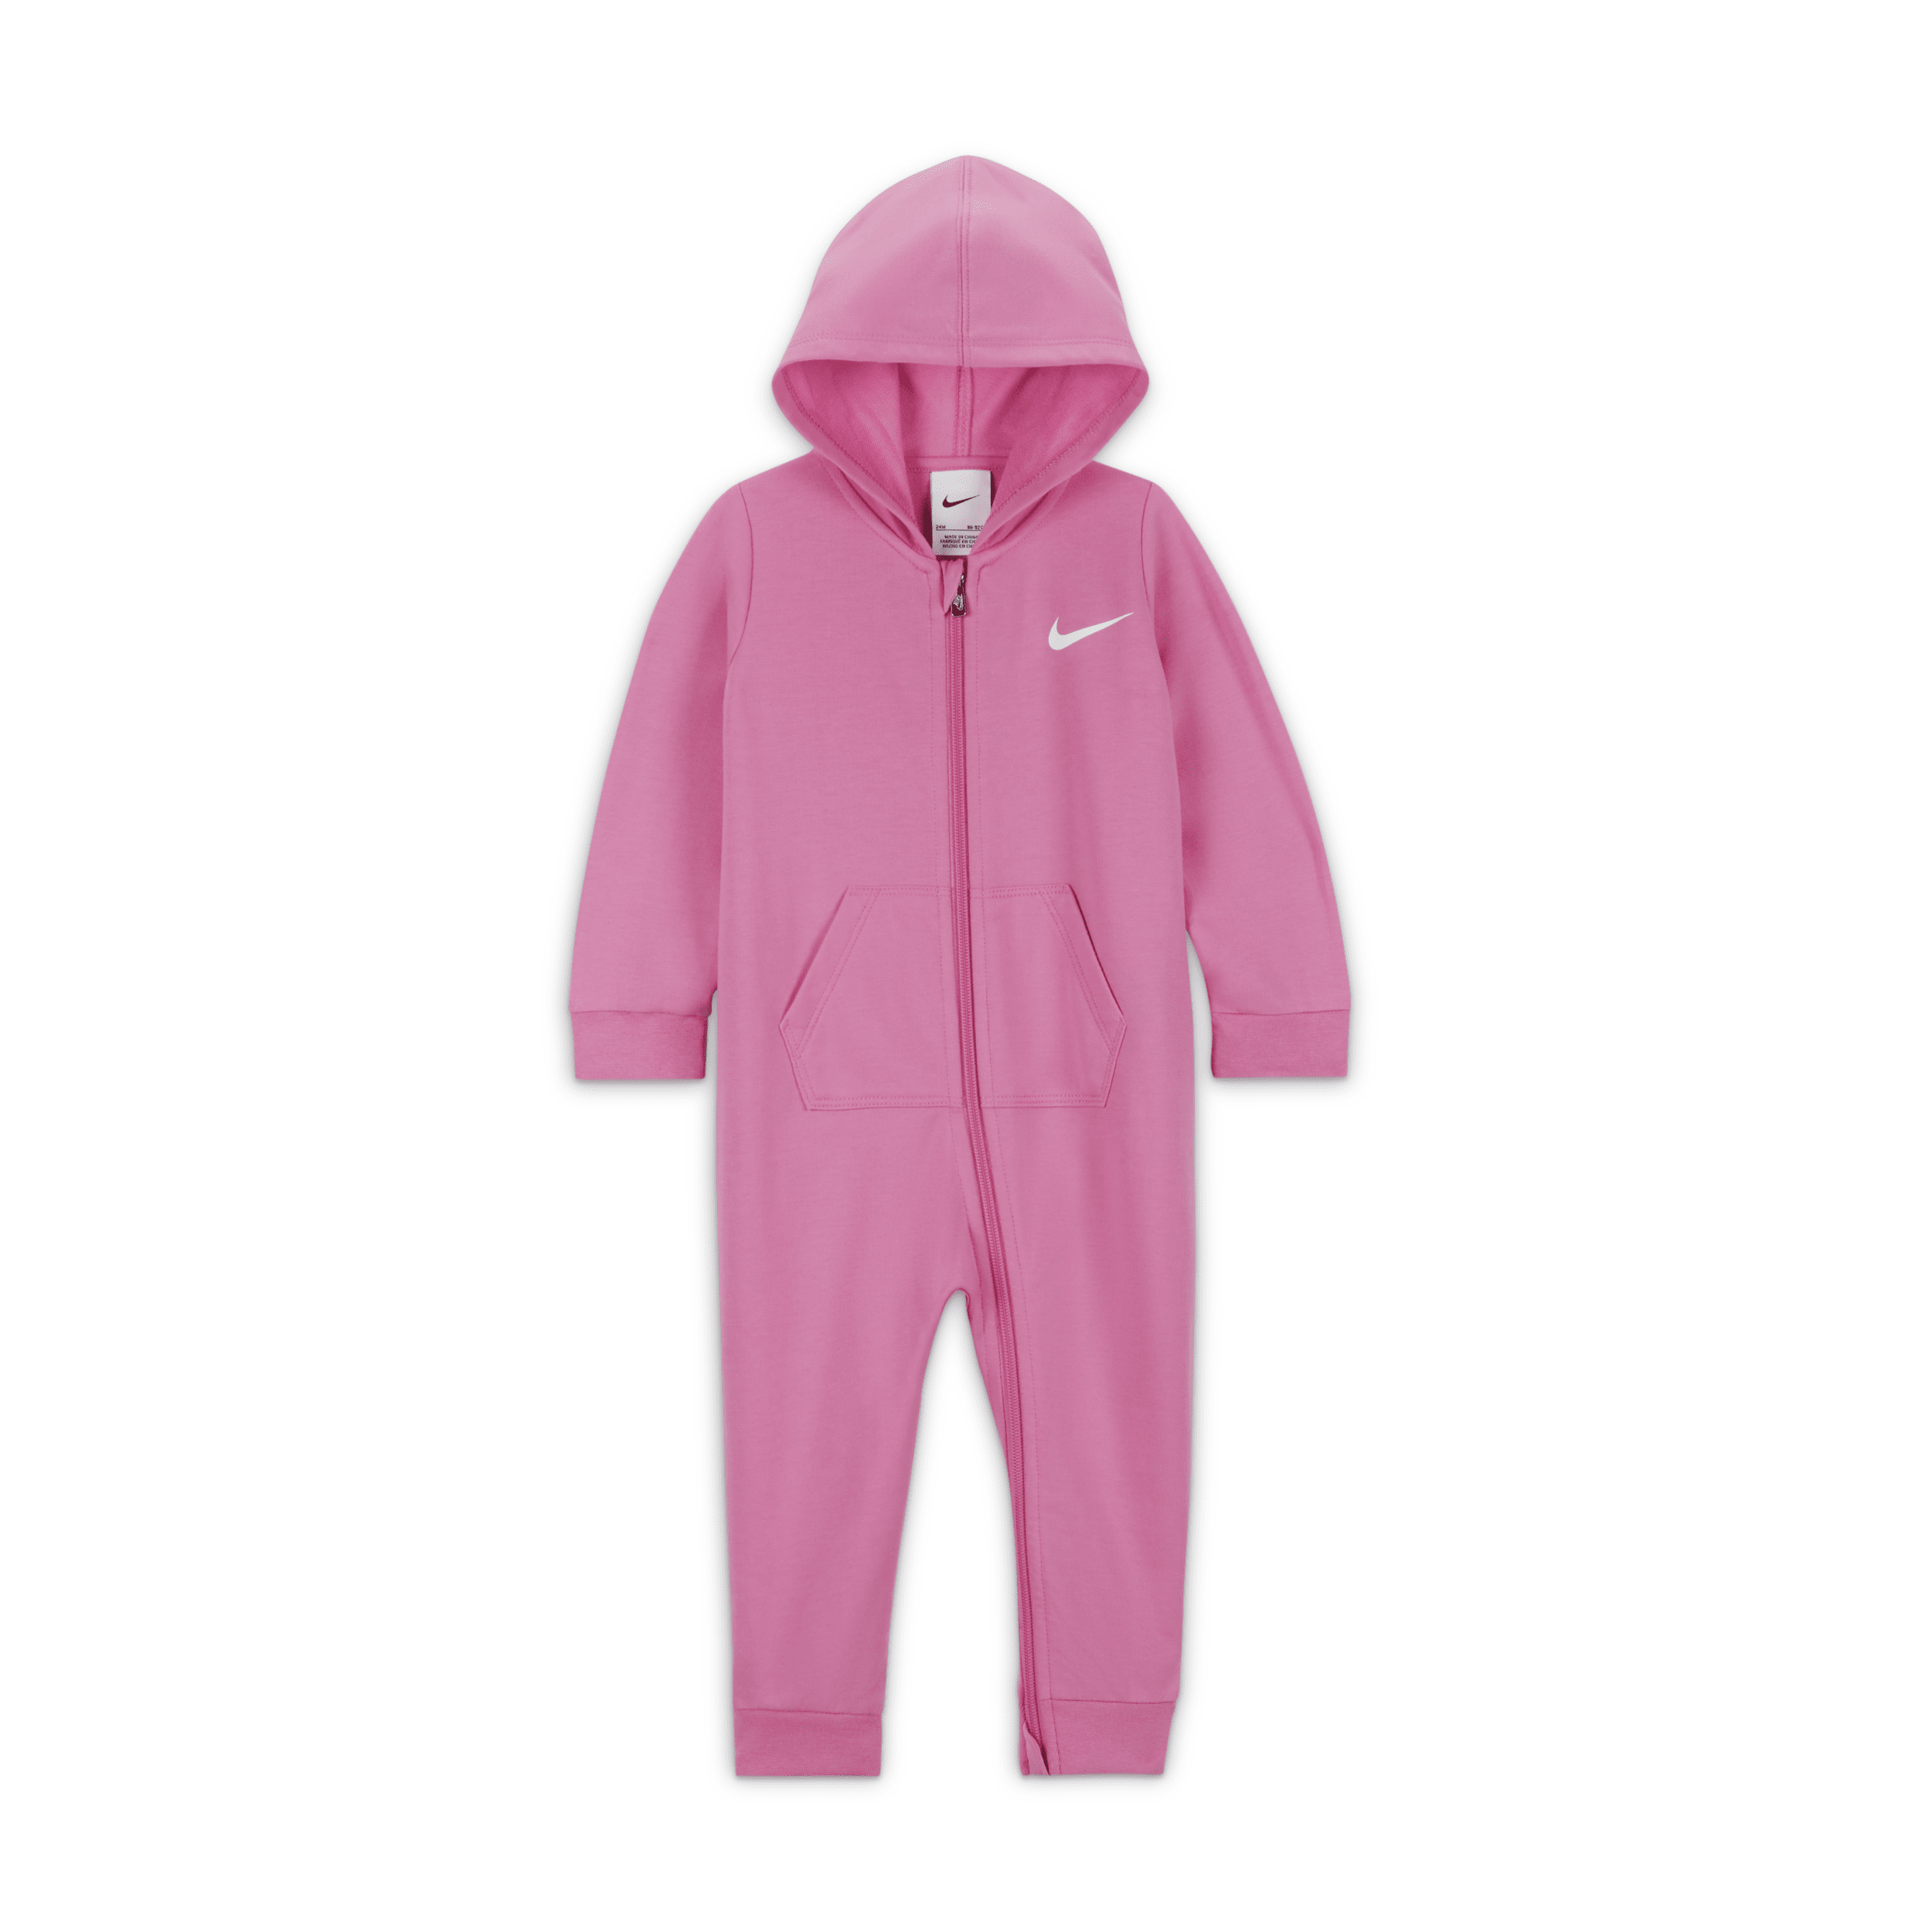 Nike Essentials Hooded Coverall Baby Coverall In Pink